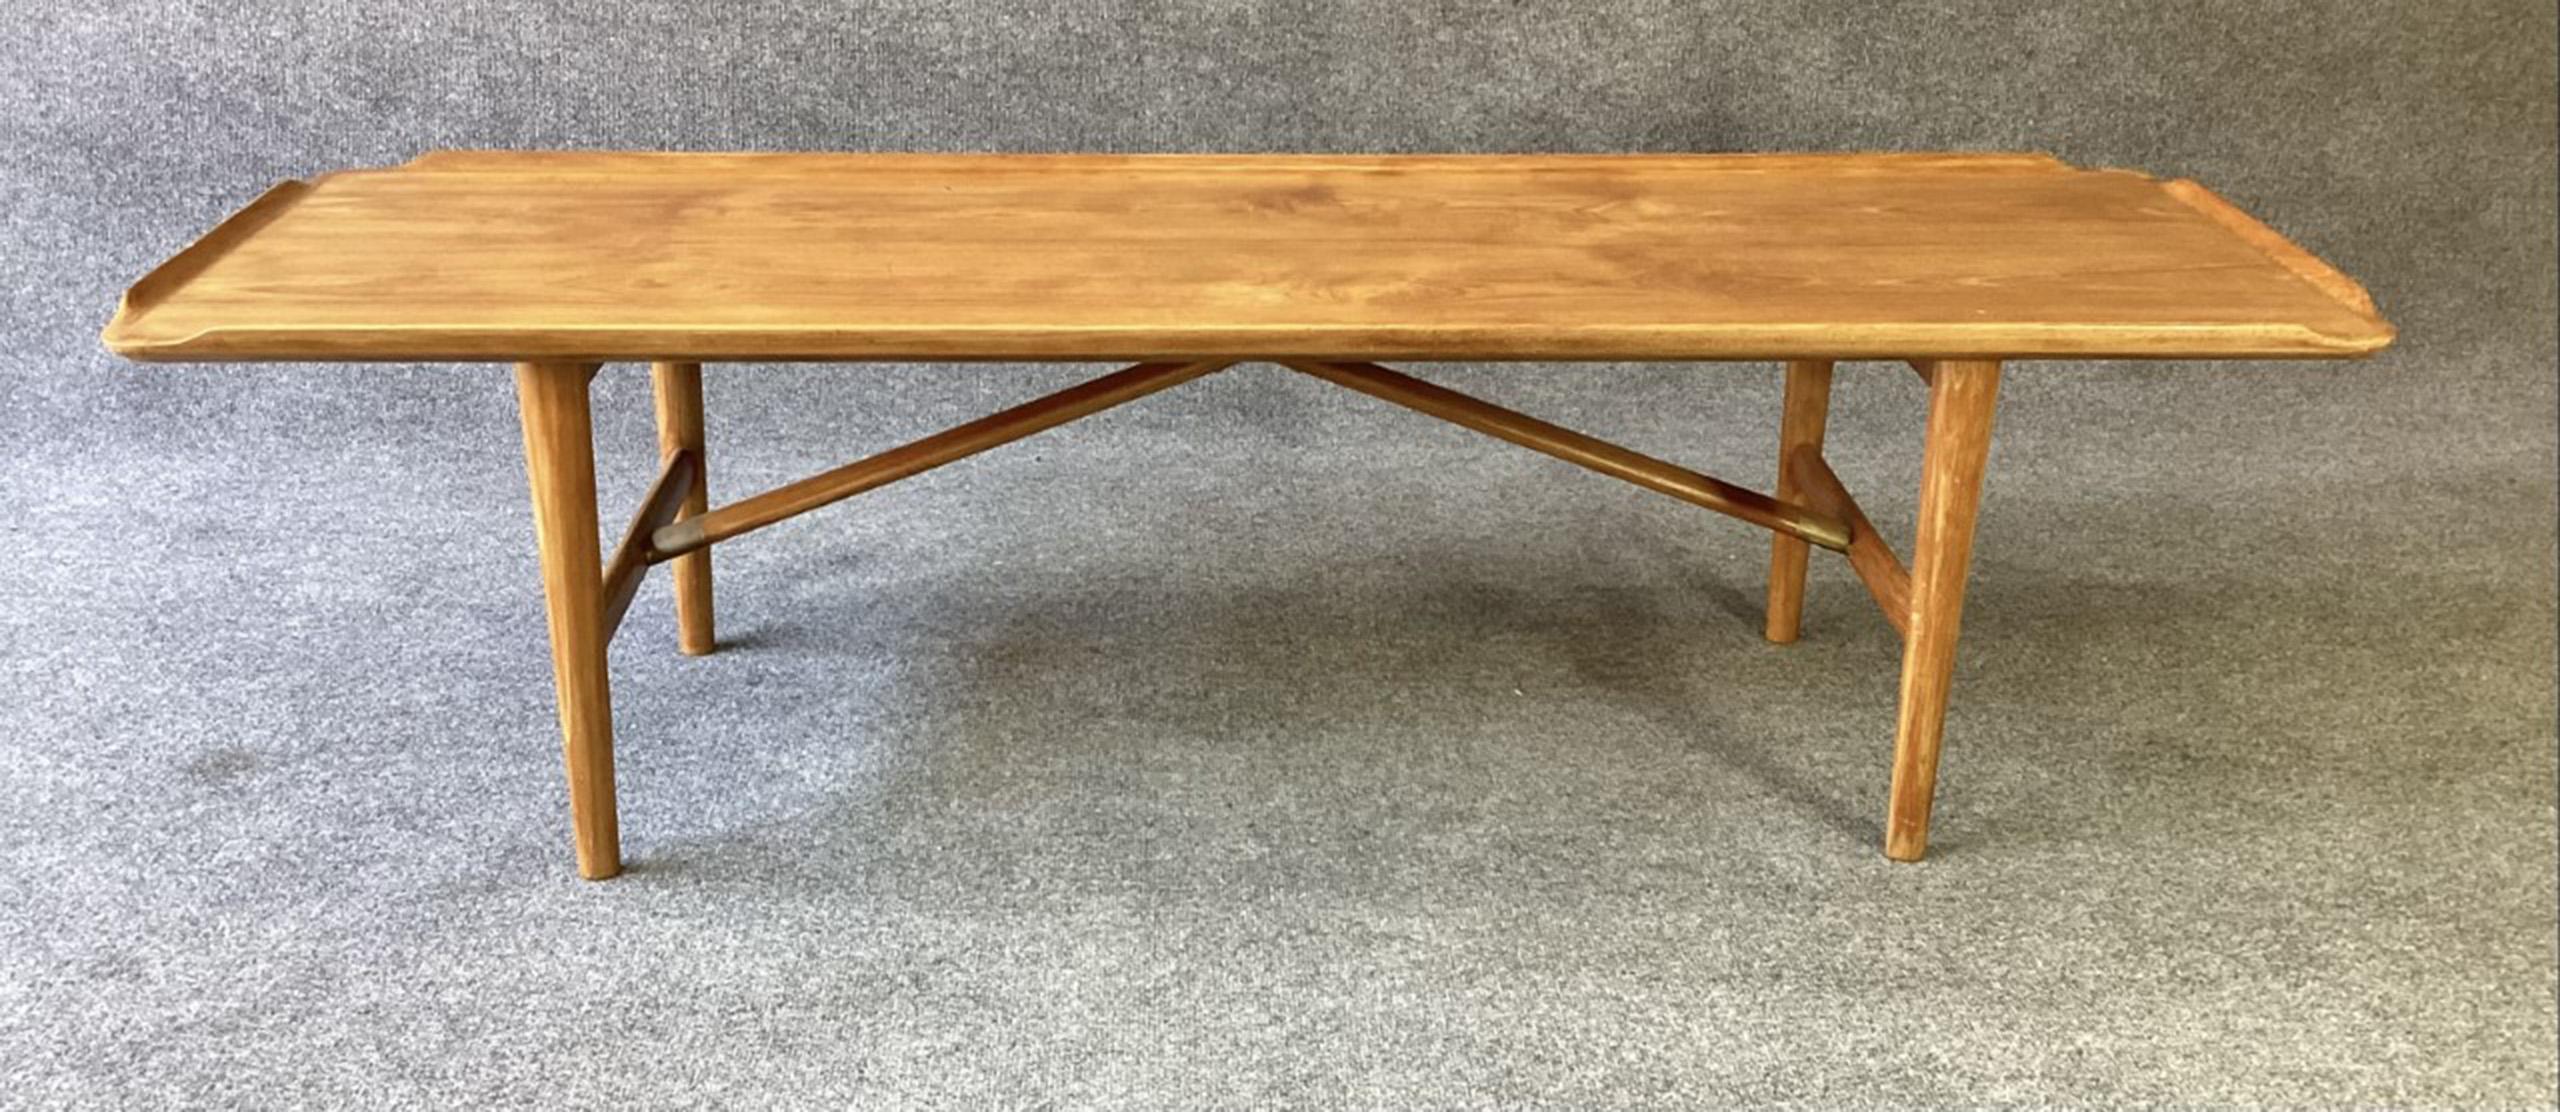 Vintage Danish Modern Teak & Brass Coffee Table Attributed to Kurt Ostervig MCM For Sale 1